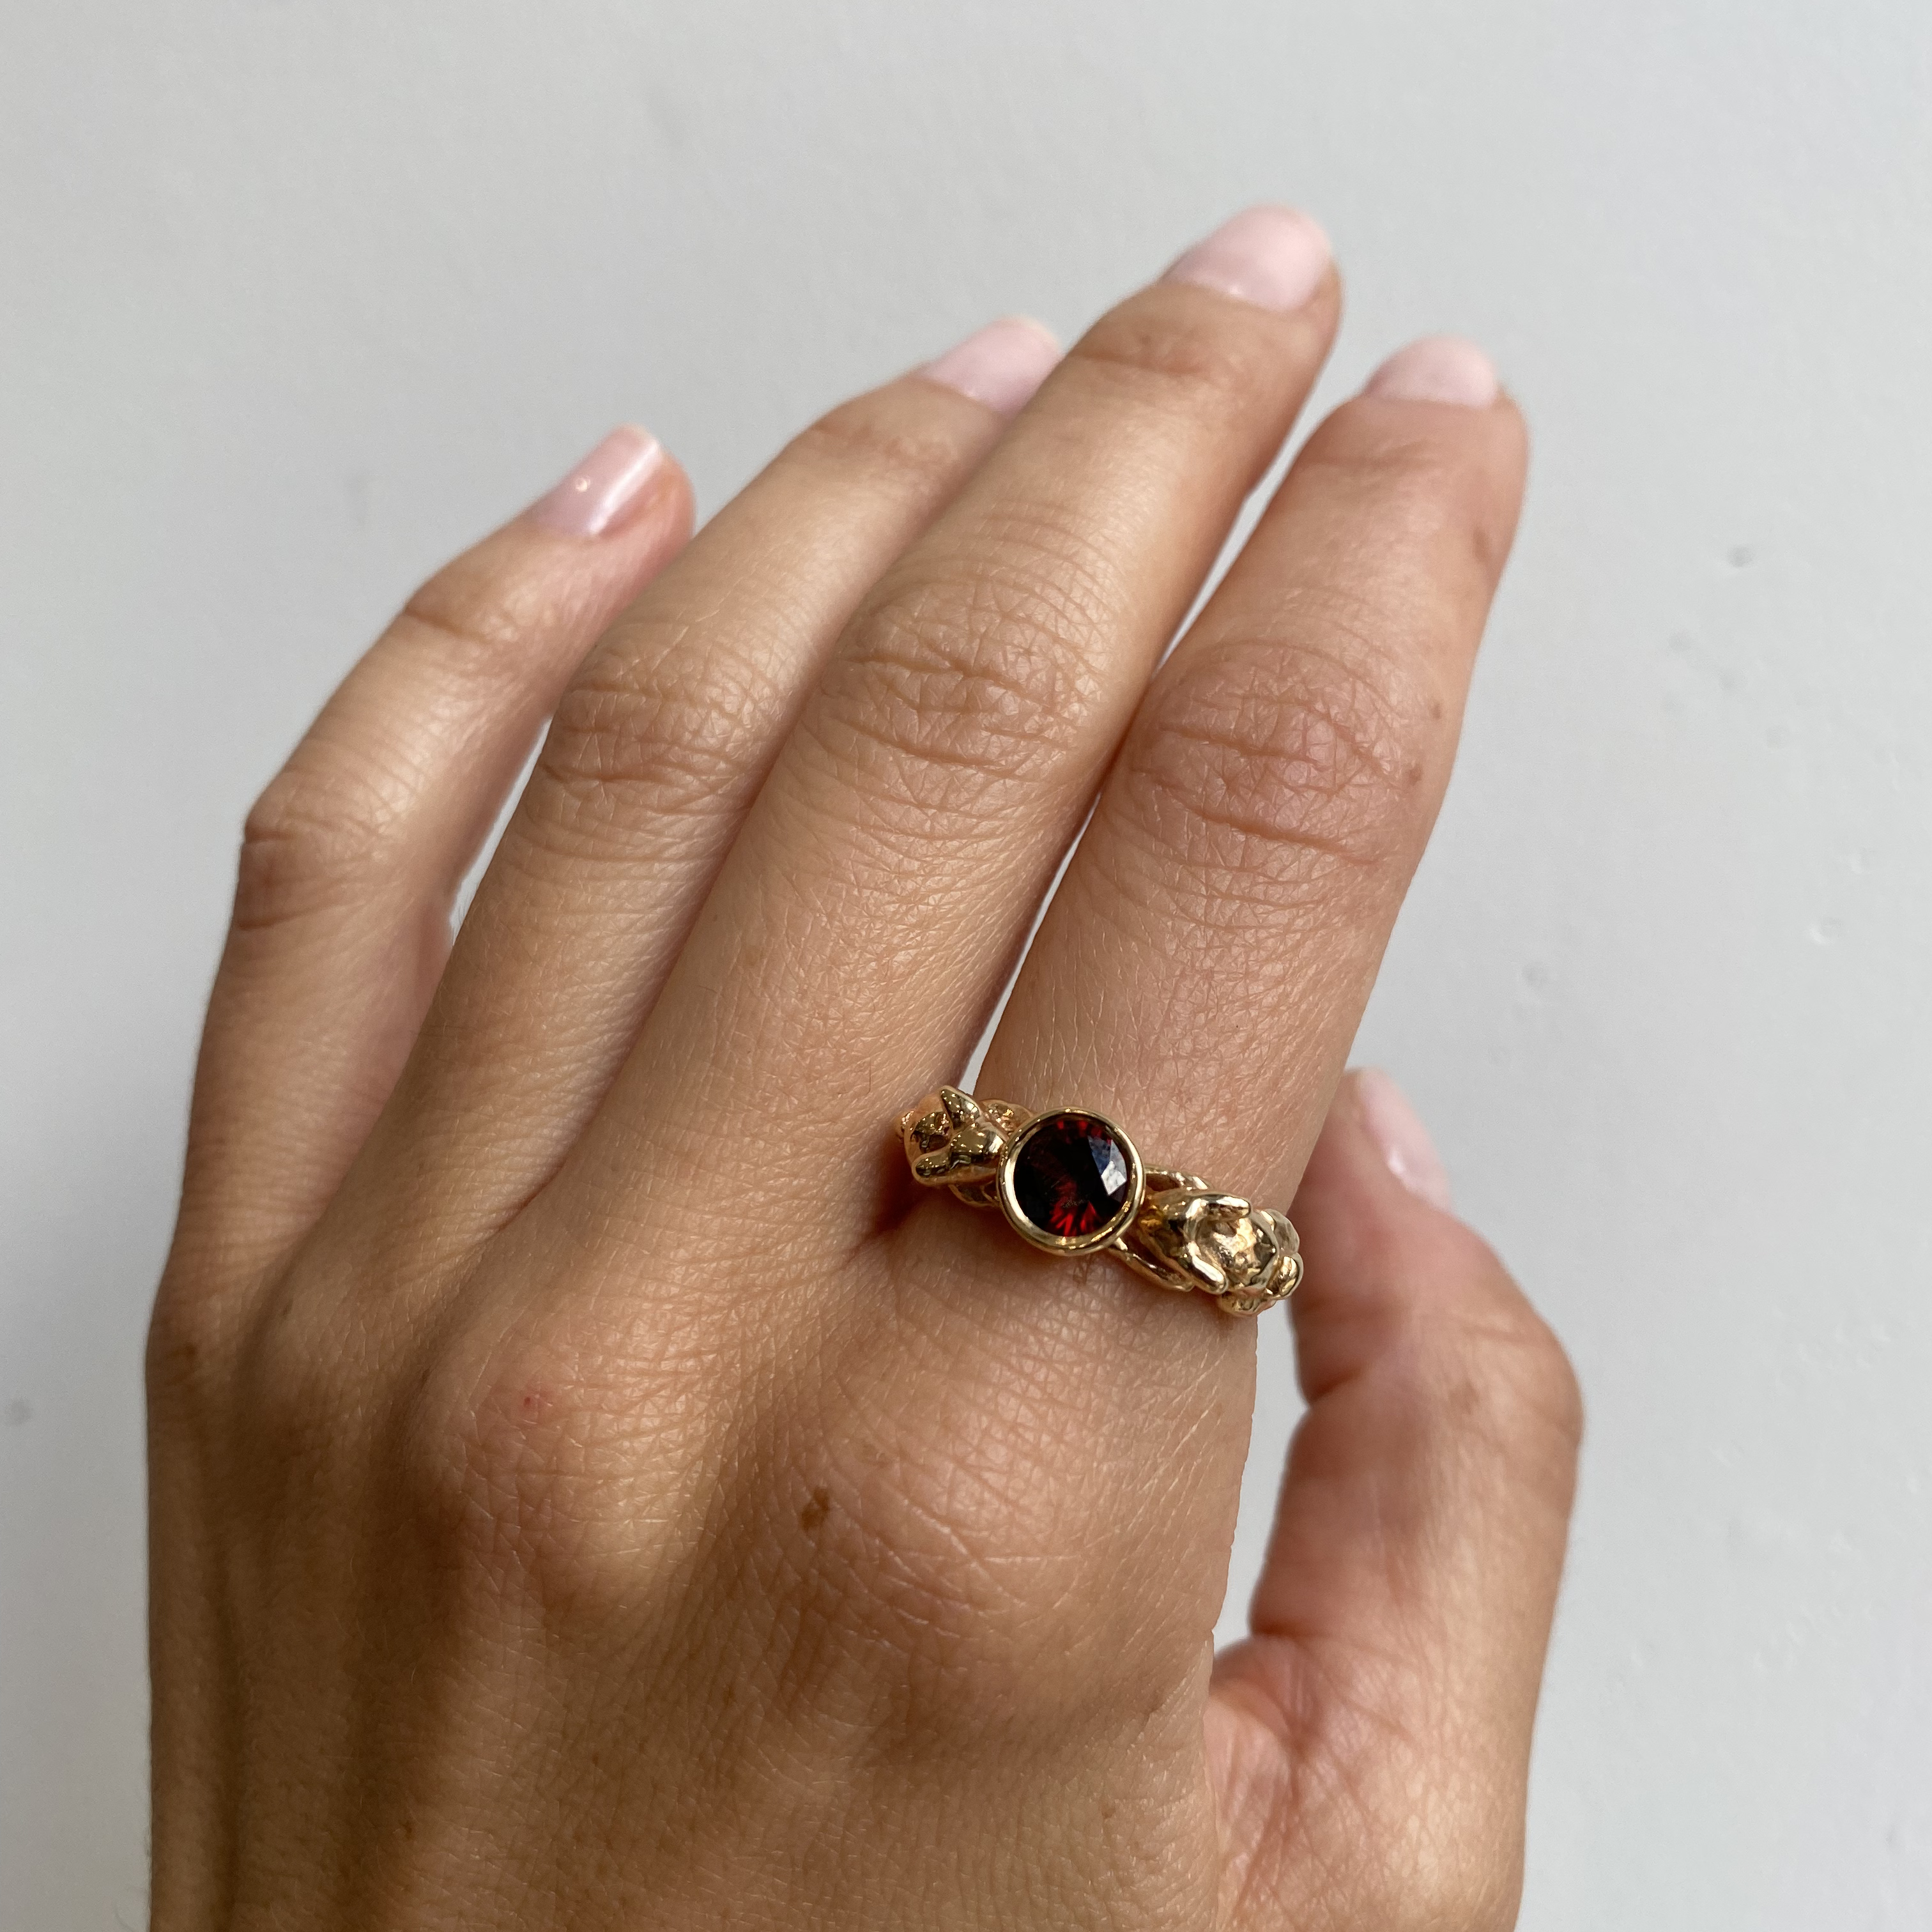 Rough Water Ring / Burmese Garnet By O Channell Designs in Engagement Rings Category